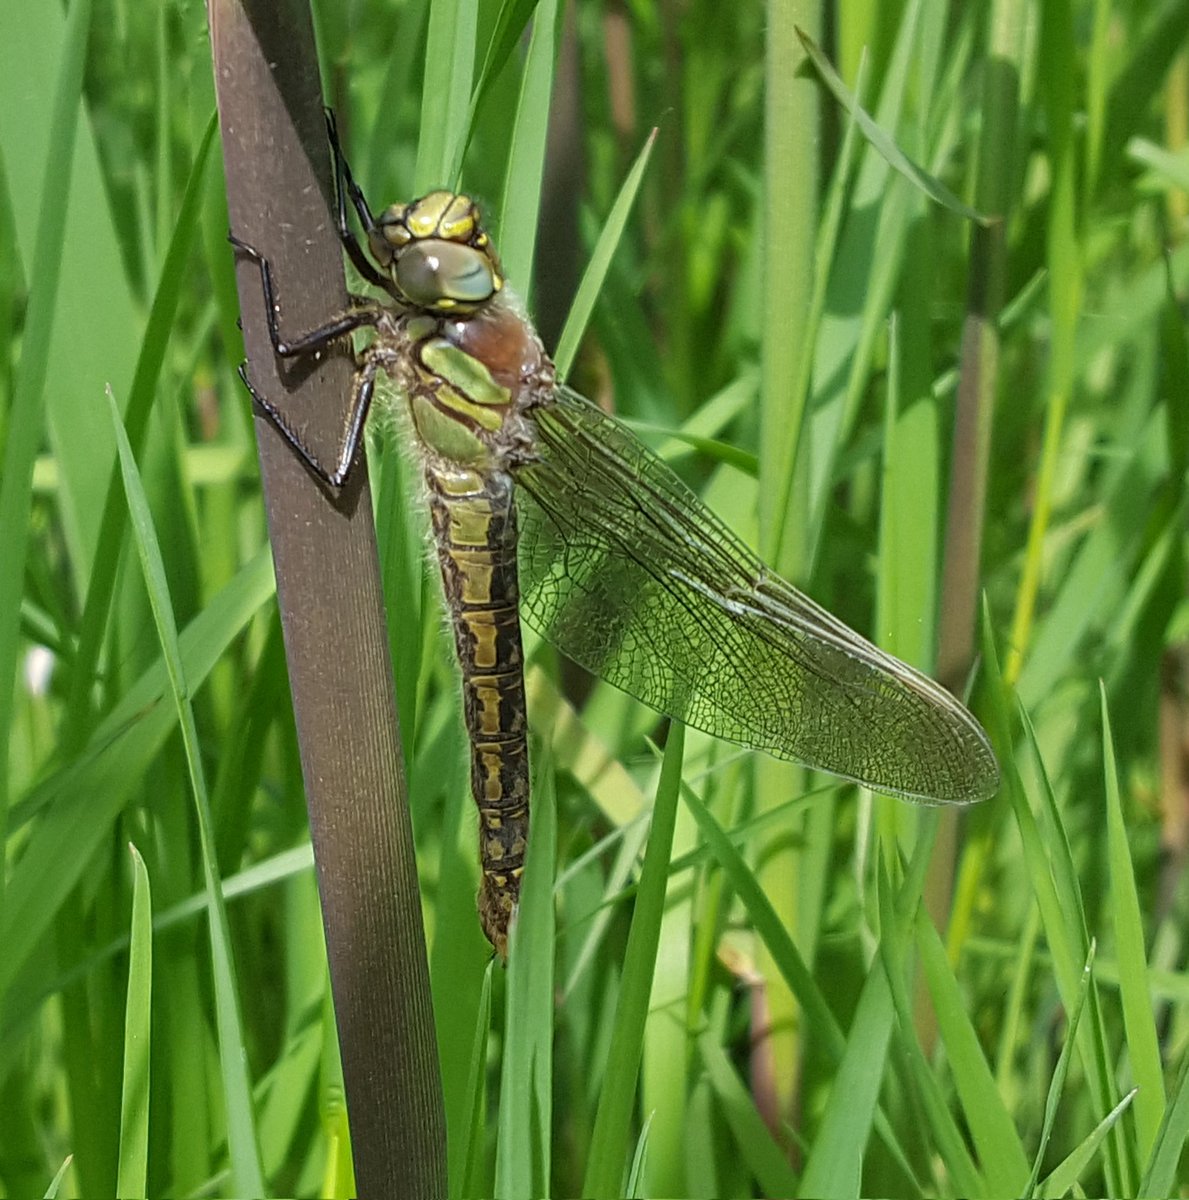 I think I was privileged to witness the maiden flight of a teneral female Hairy Dragonfly today. @RSPBFrampton @Kasabyanwild @SteveRoutledge8